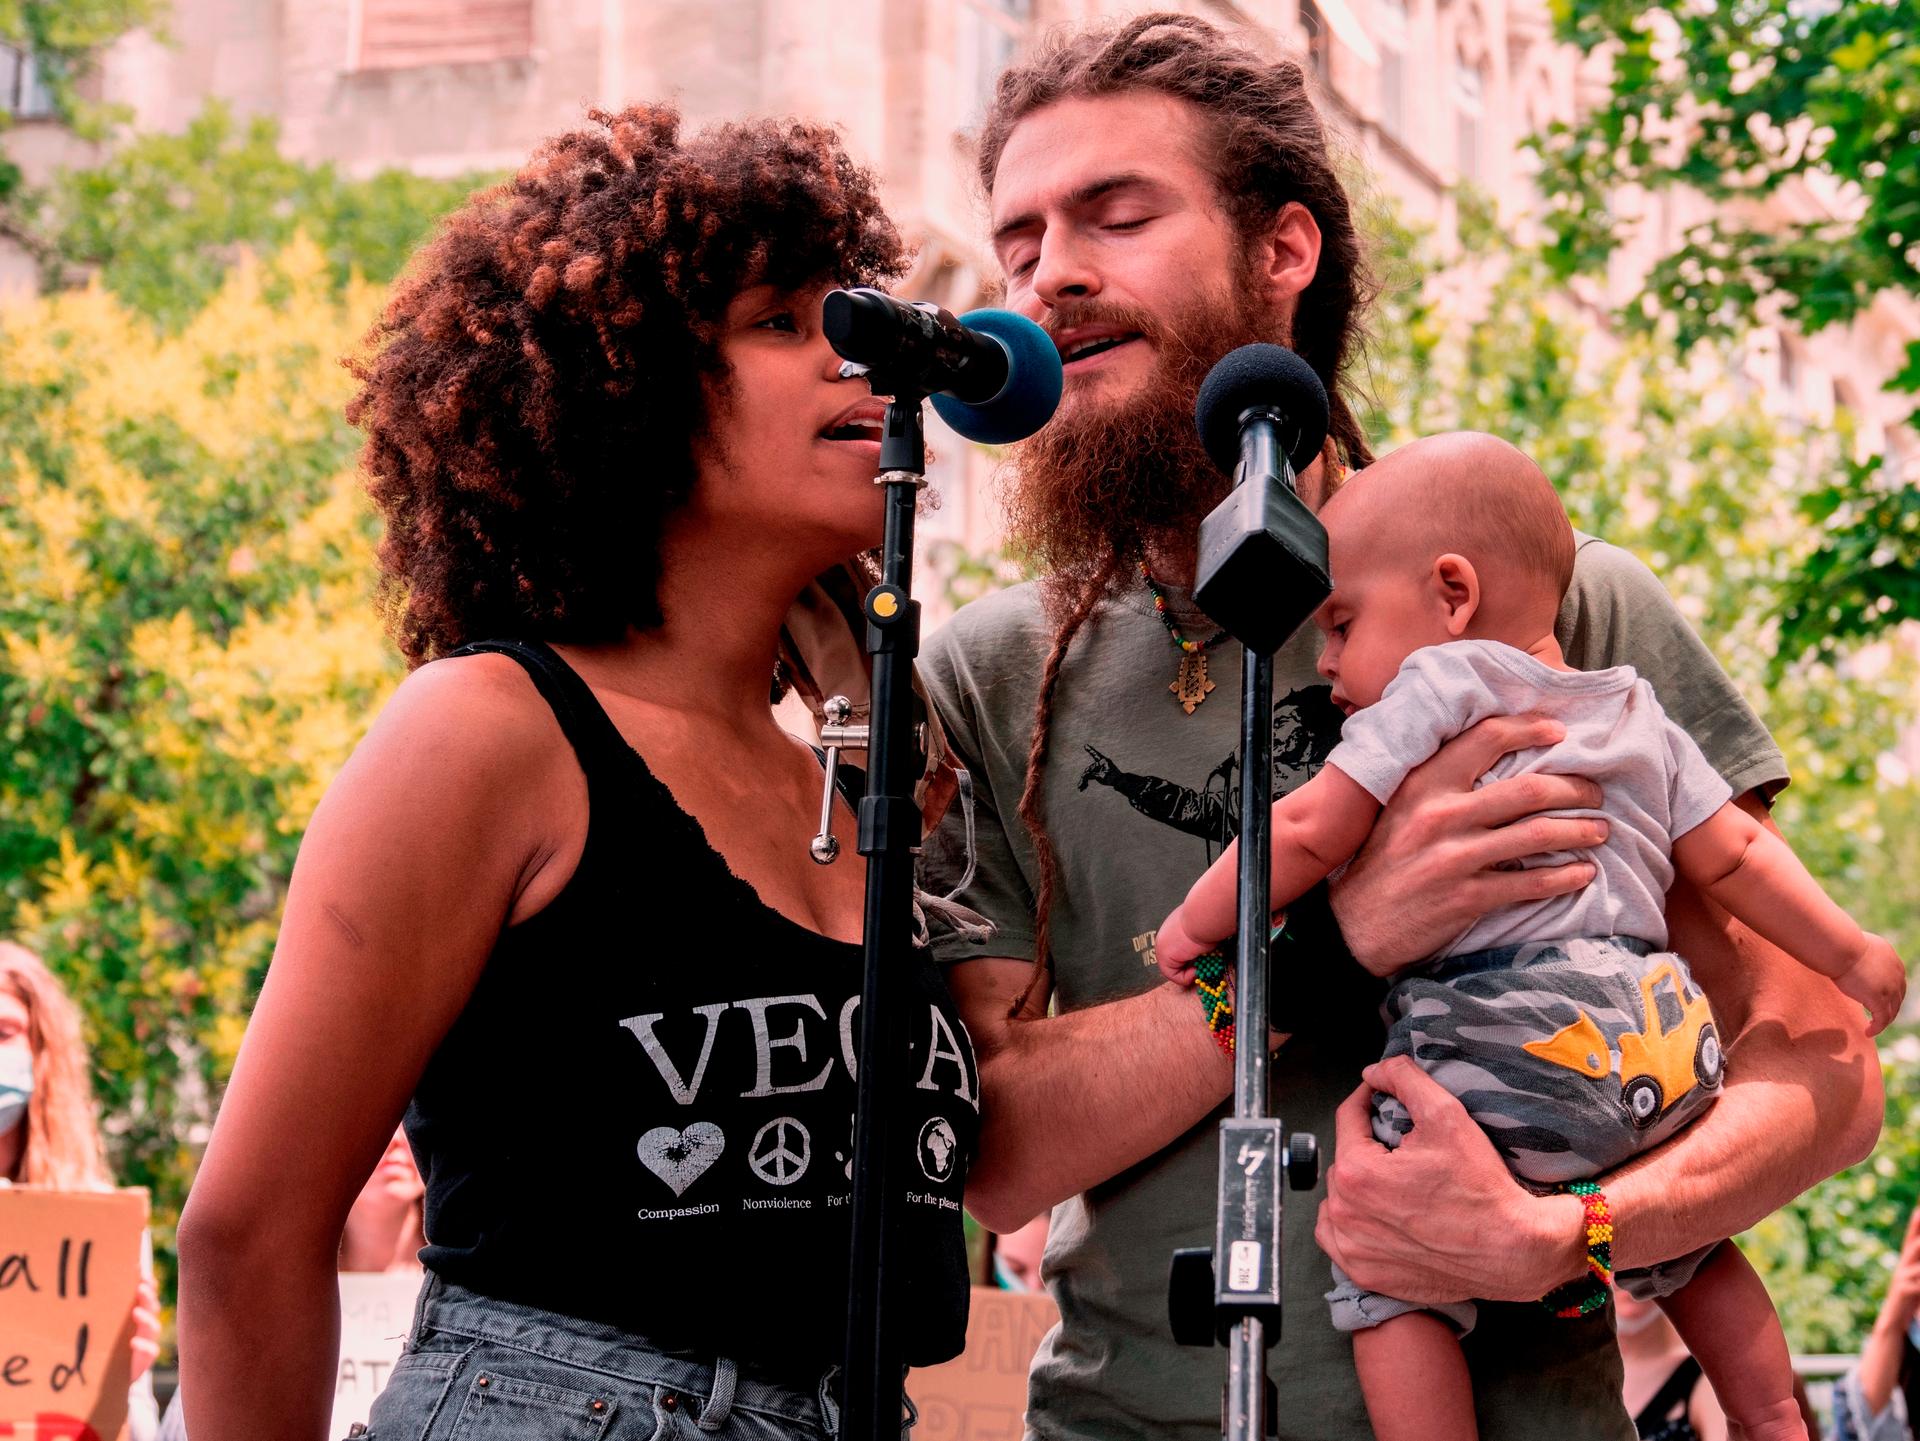 Gregory G Ras, a reggae singer and activist, organized the main Black Lives Matter march in Budapest last summer. His wife and baby Noah are pictured with him. 